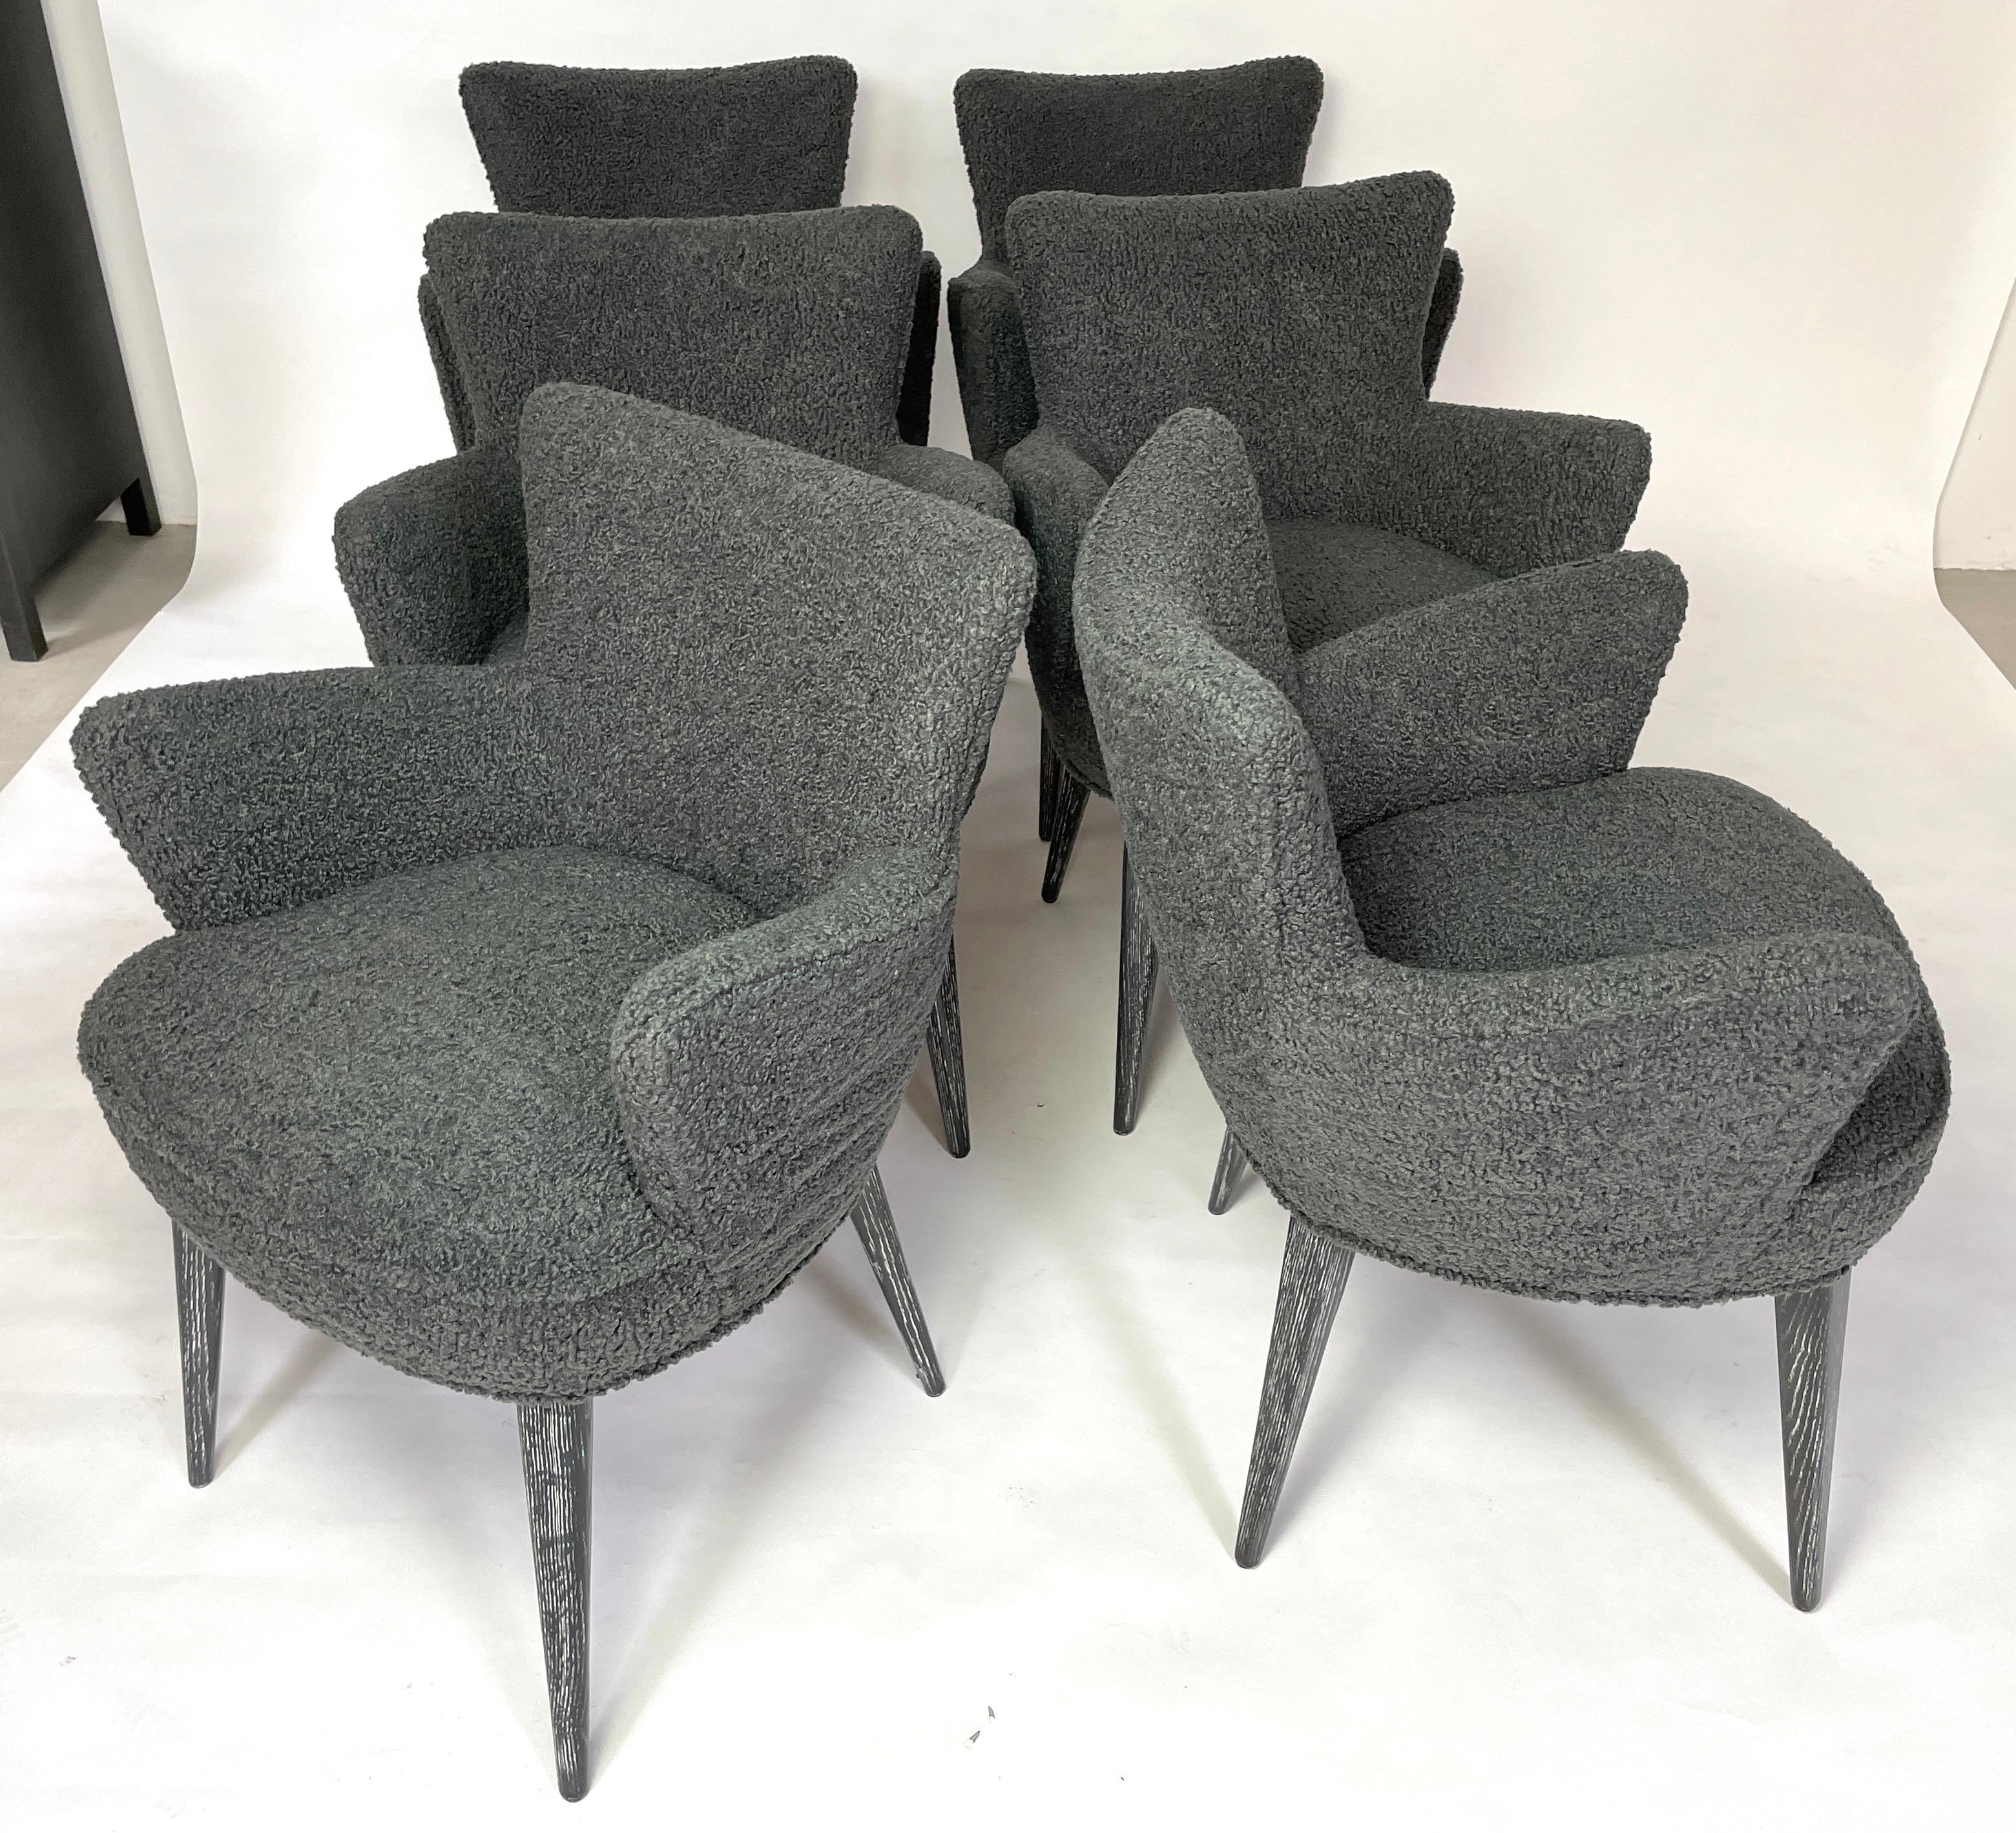 This stylish chair can stand alone as a side chair or is perfect in the dining room. It has modern lines, but the oak legs will sit well with any wood furnishings. The curved frame
hugs you comfortably with the armrest being at a perfect height.